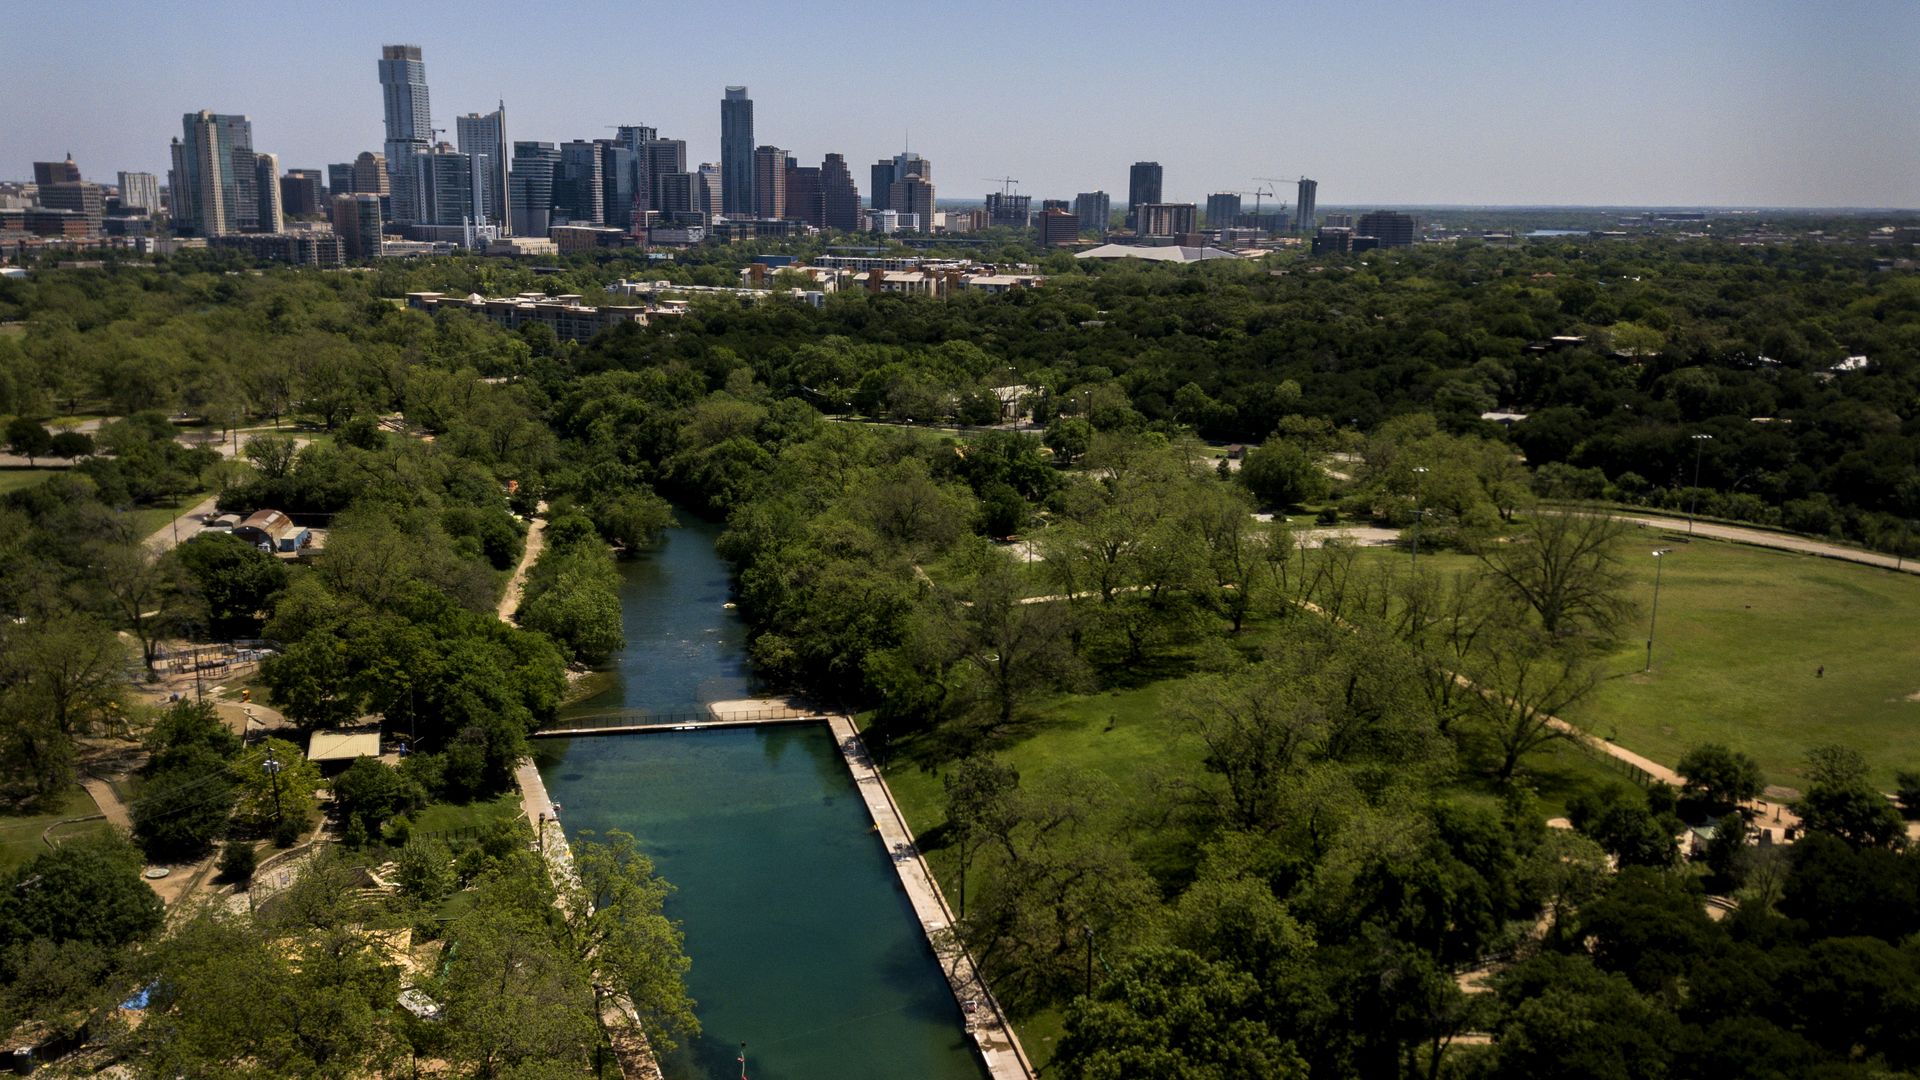 Barton Springs pool in the foreground with the Austin skyline in the background.